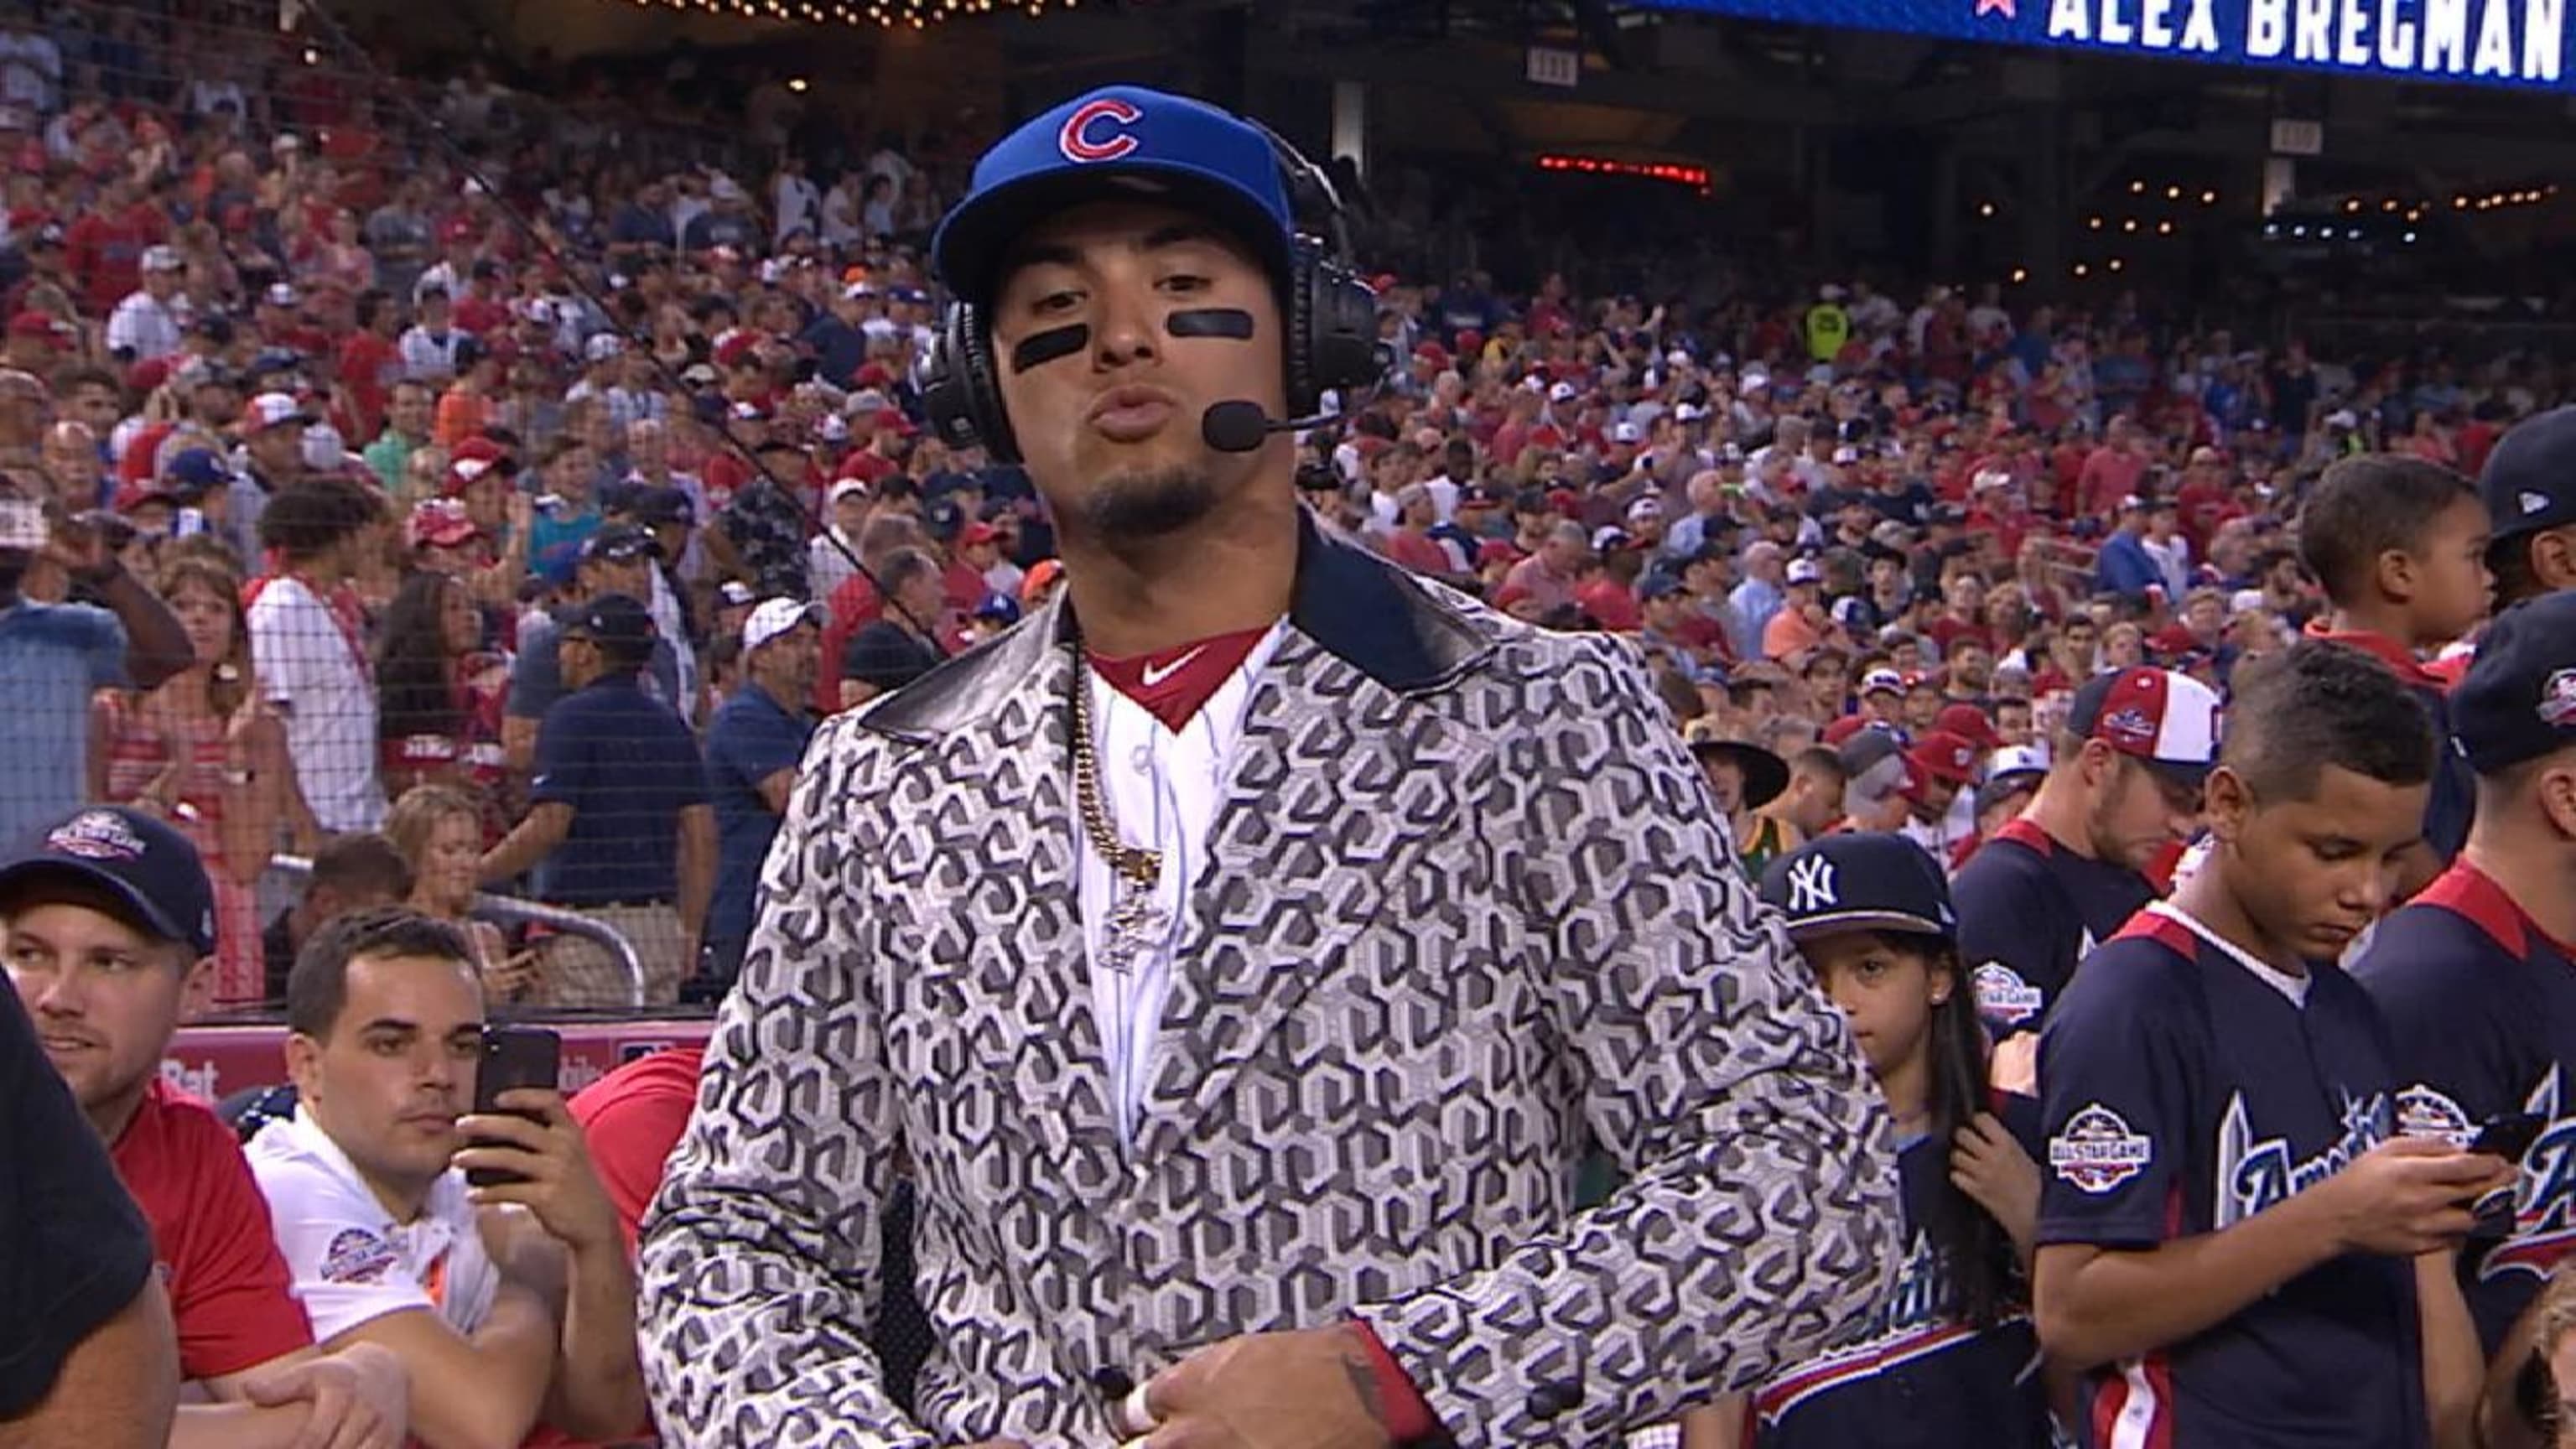 Javy Baez was the picture of style in a jacket Roberto Clemente